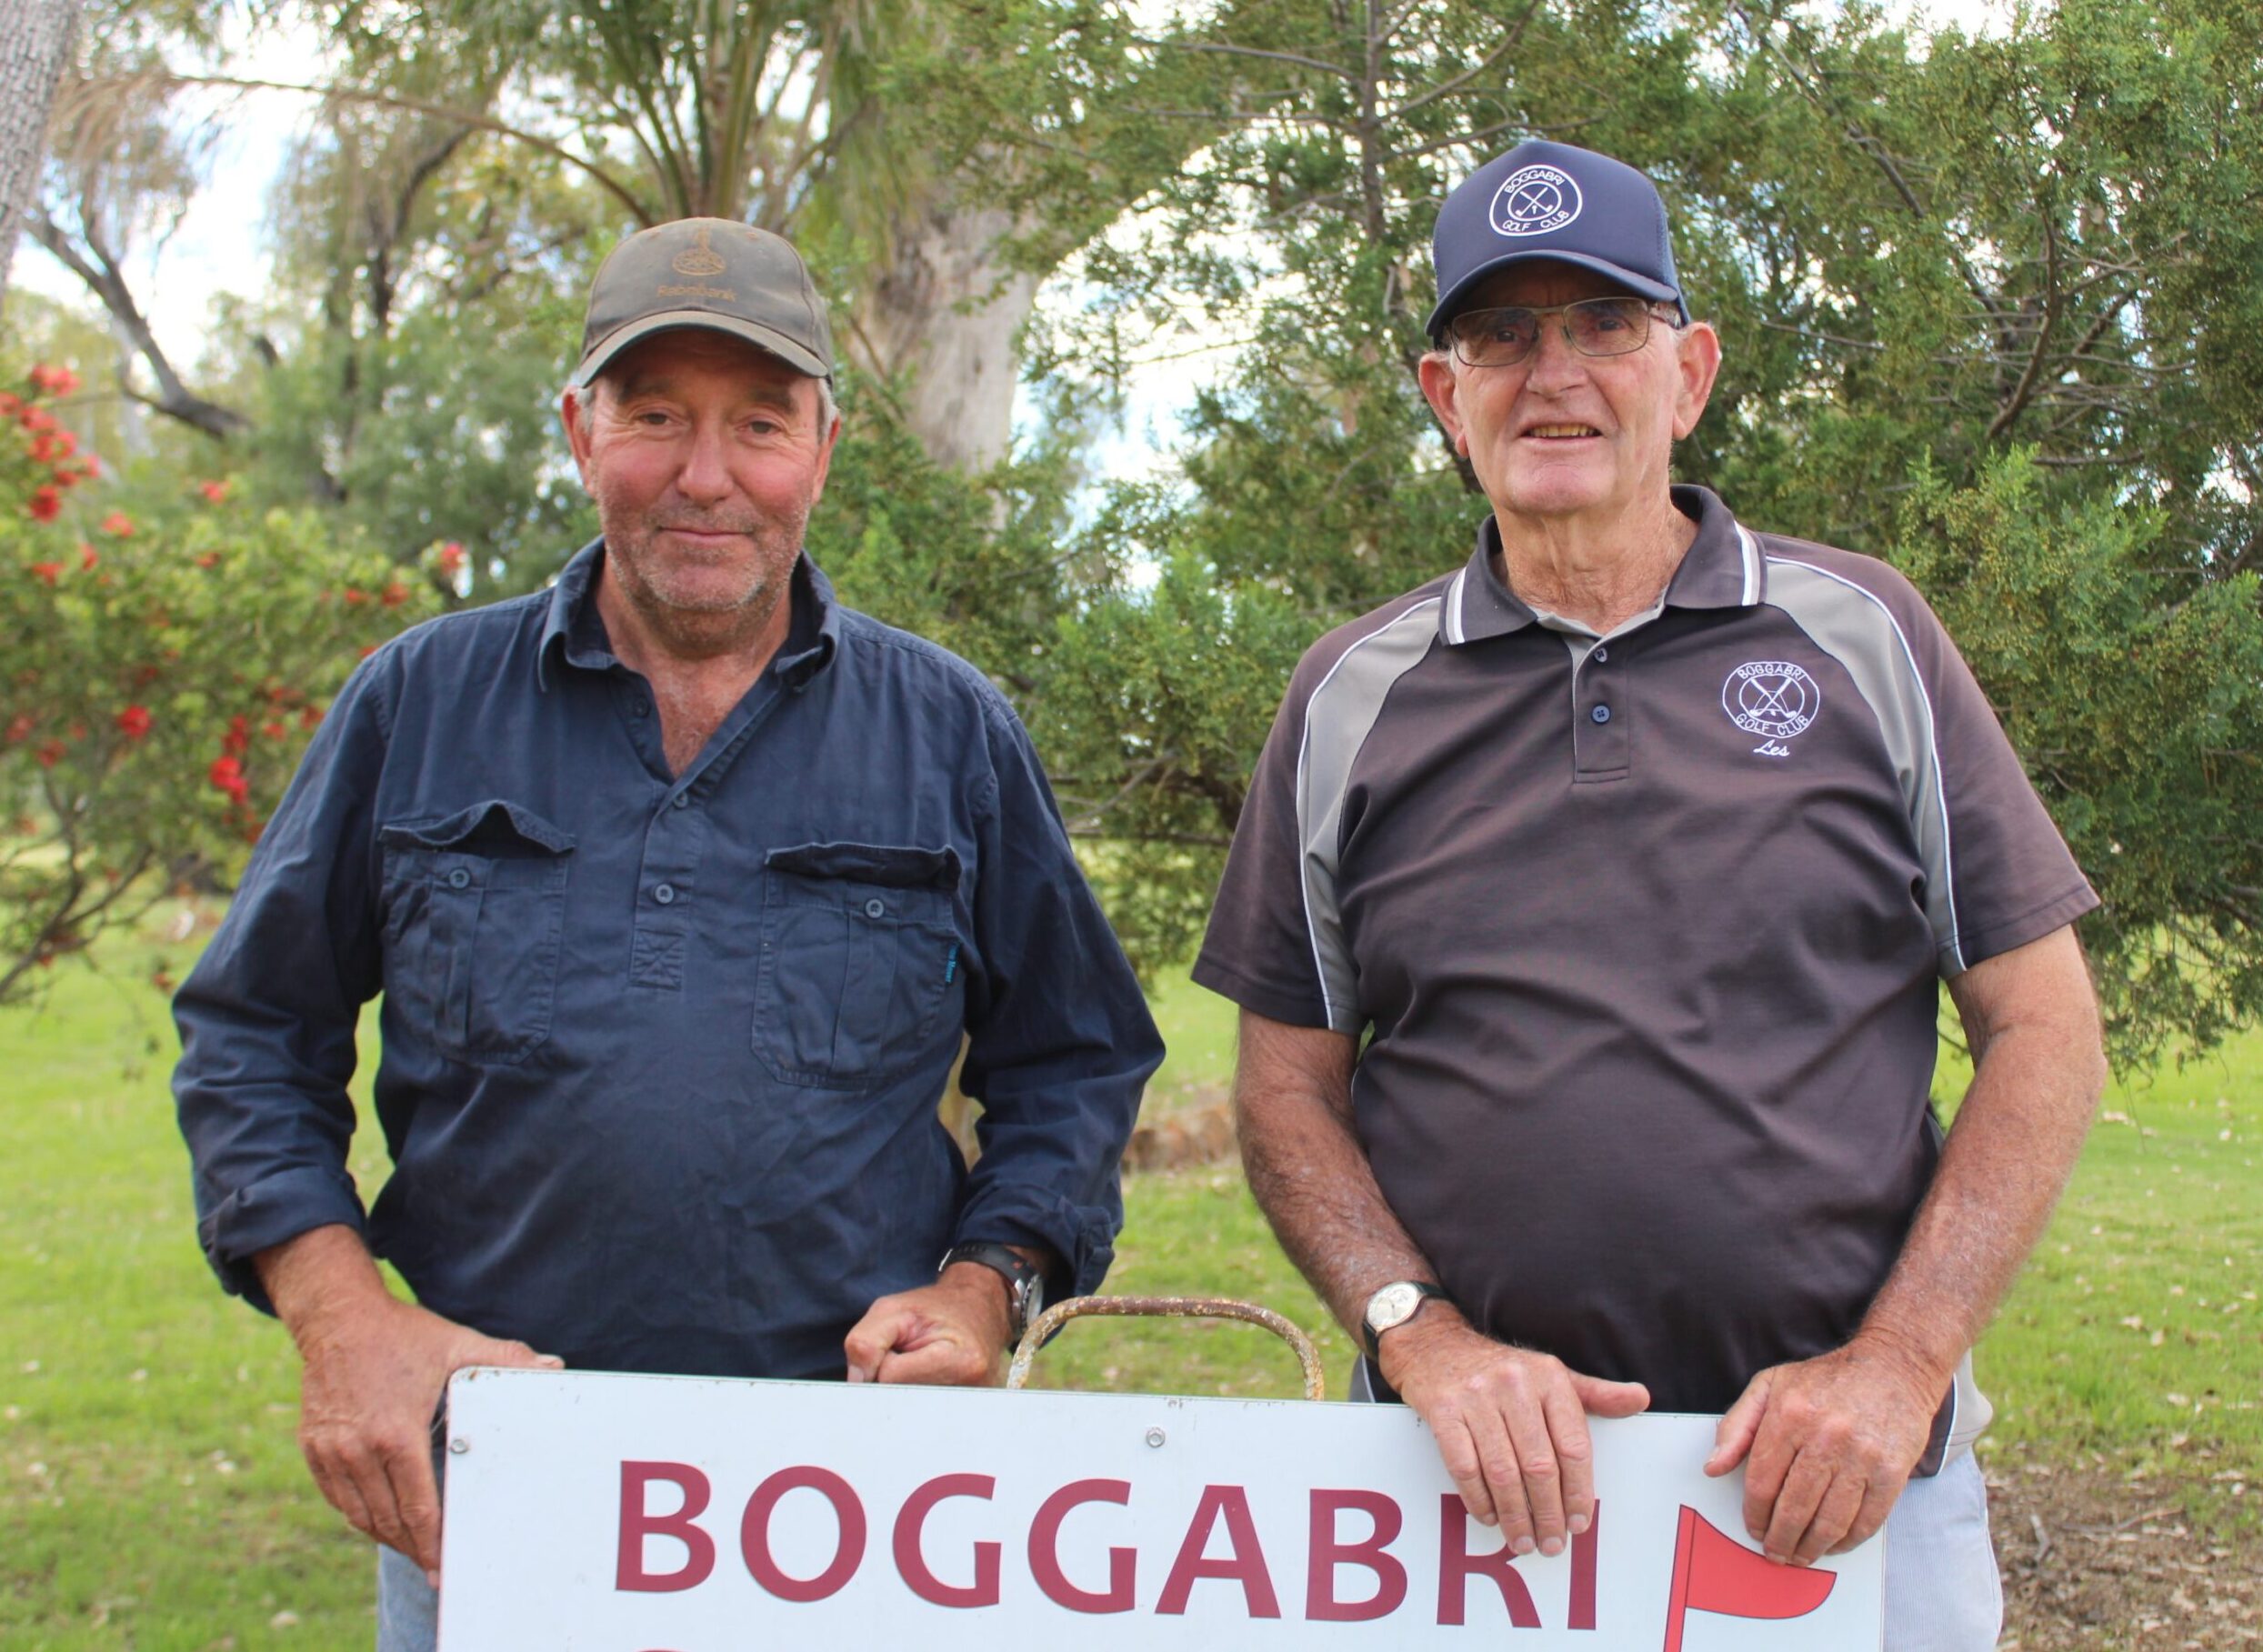 Boggabri golfers dominate at home club’s annual open day